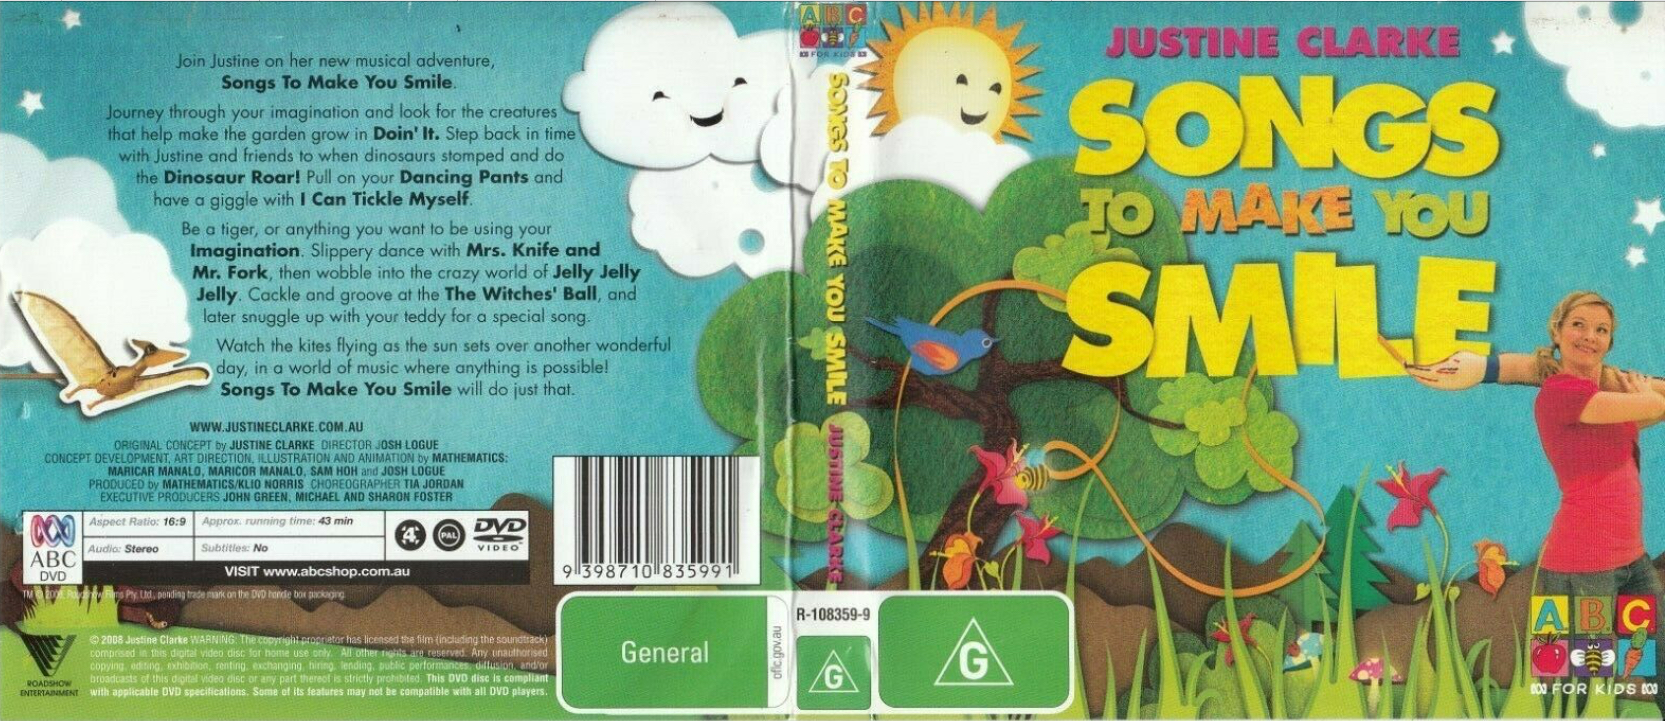 Songs That Make You Smile Songs to Make You Smile (Justine Clarke DVD)/Gallery | ABC For Kids